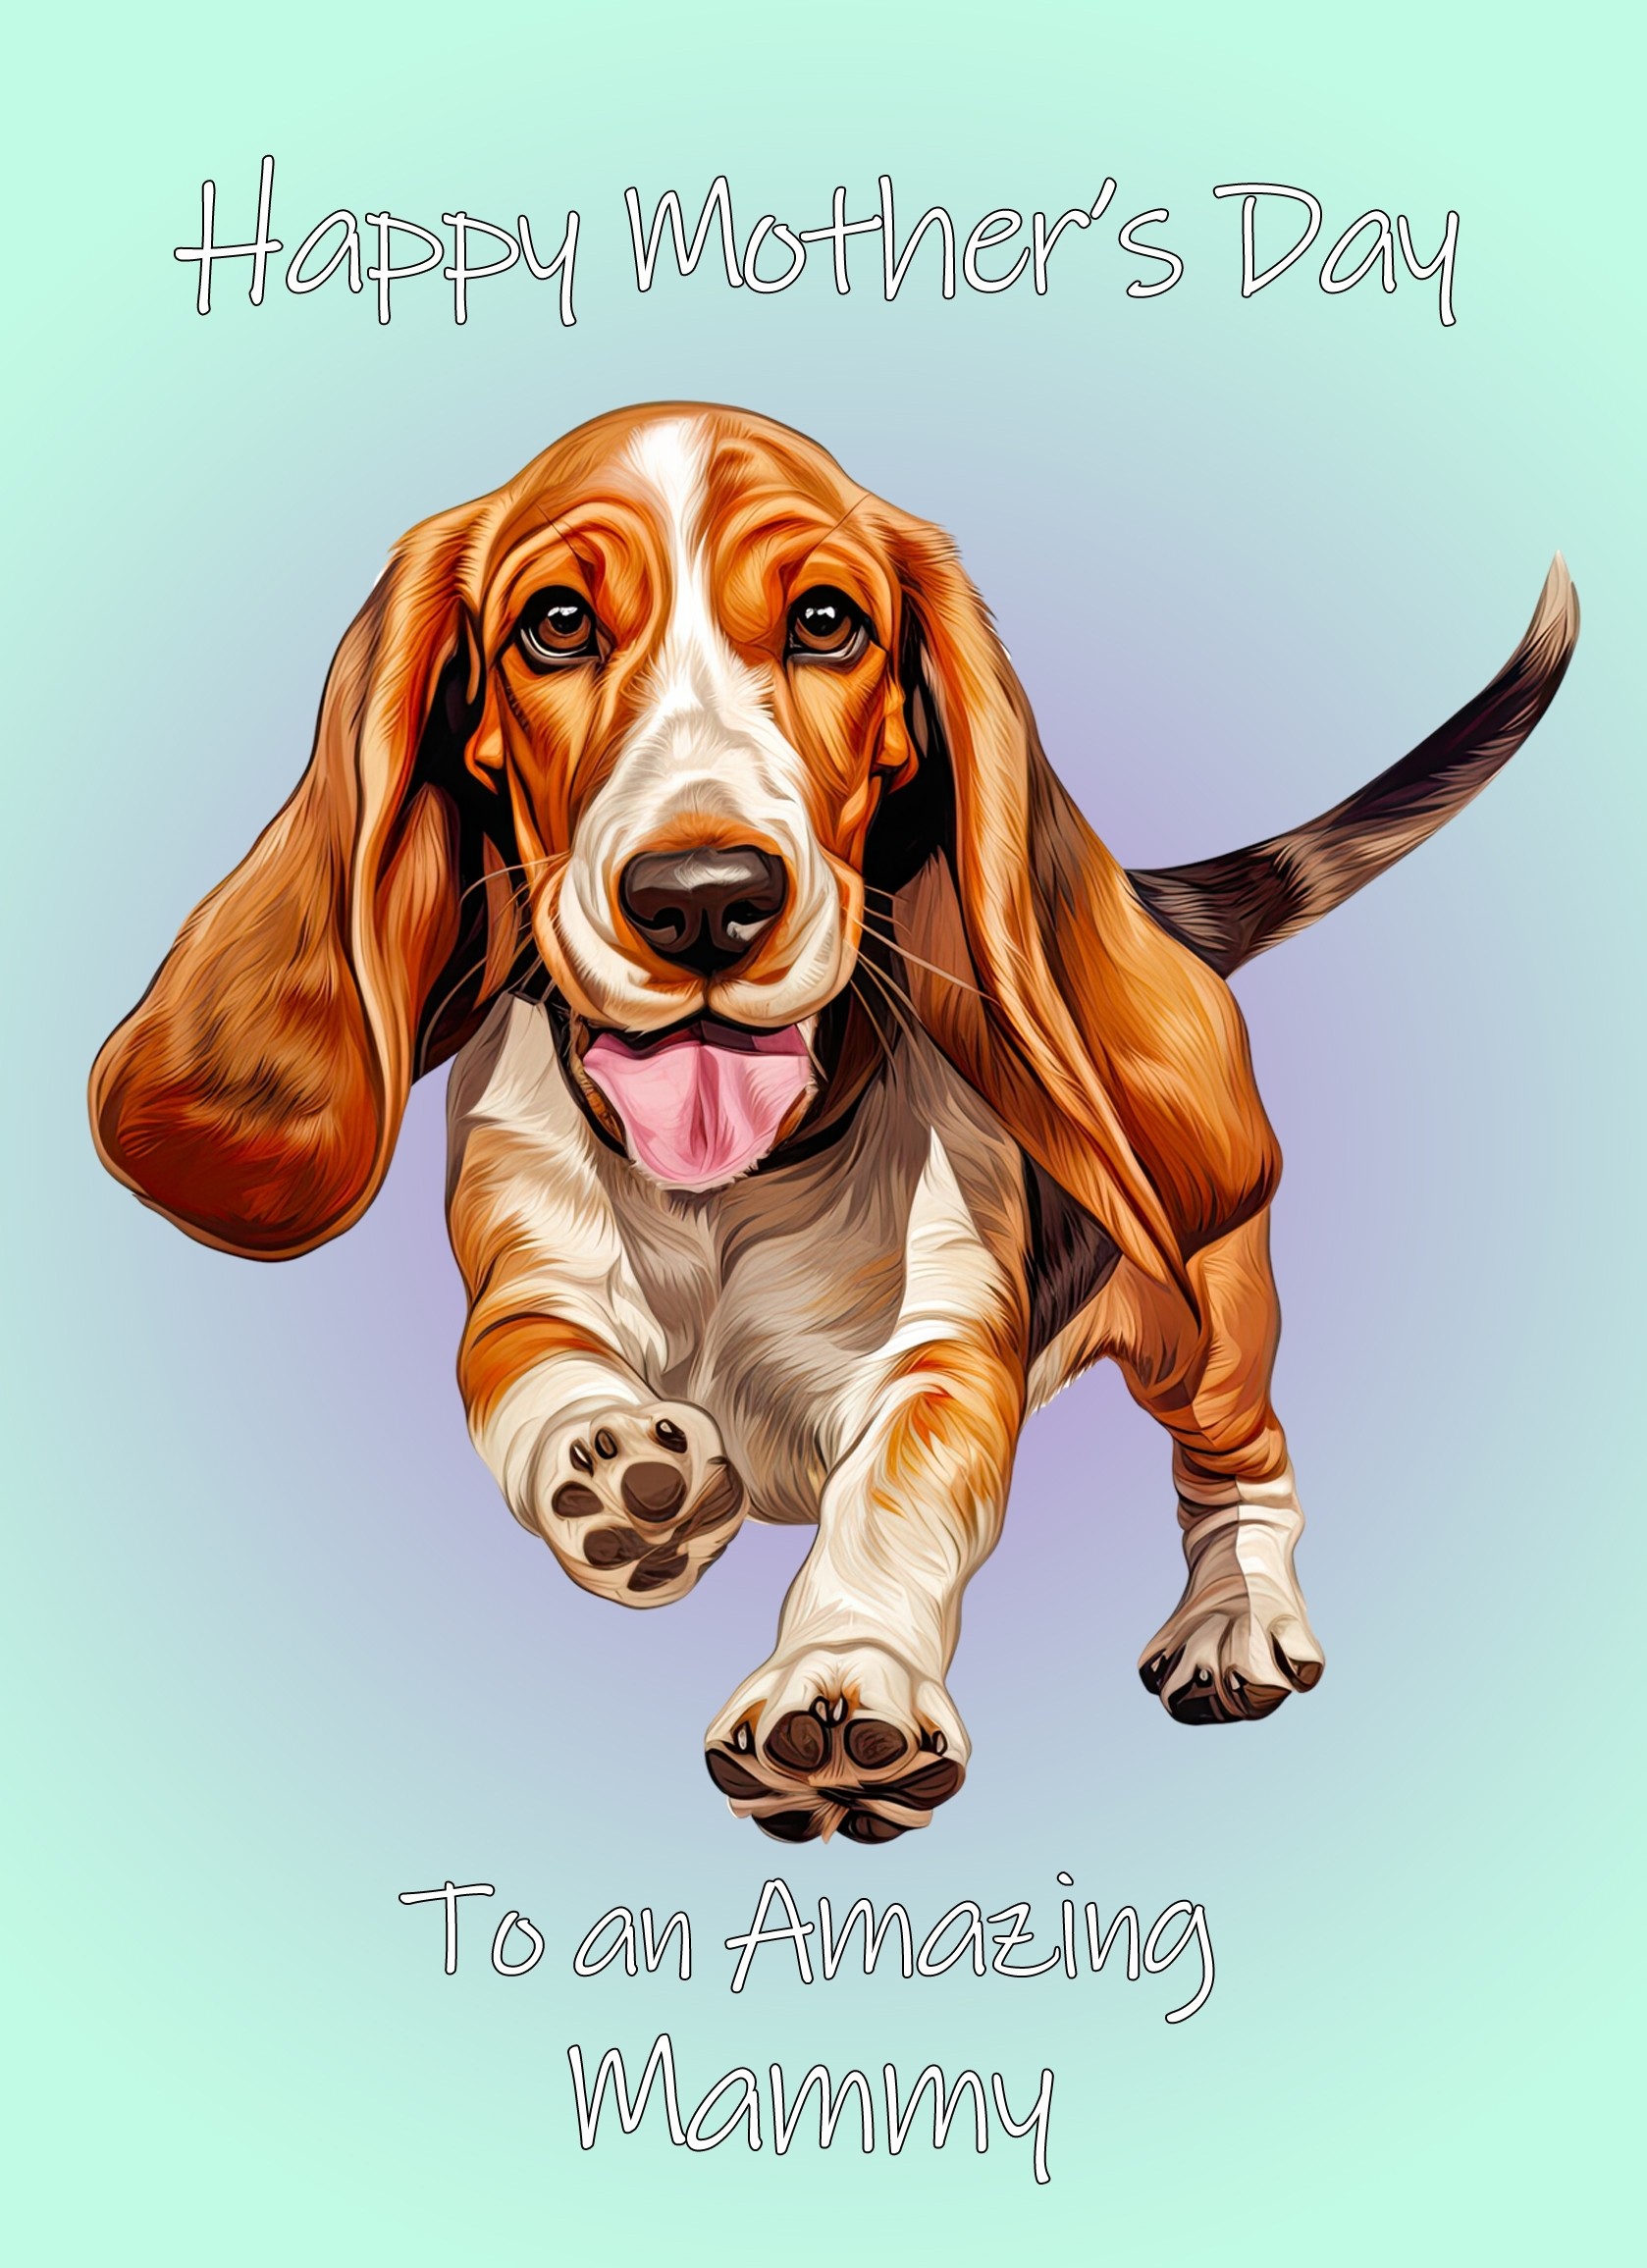 Basset Hound Dog Mothers Day Card For Mammy